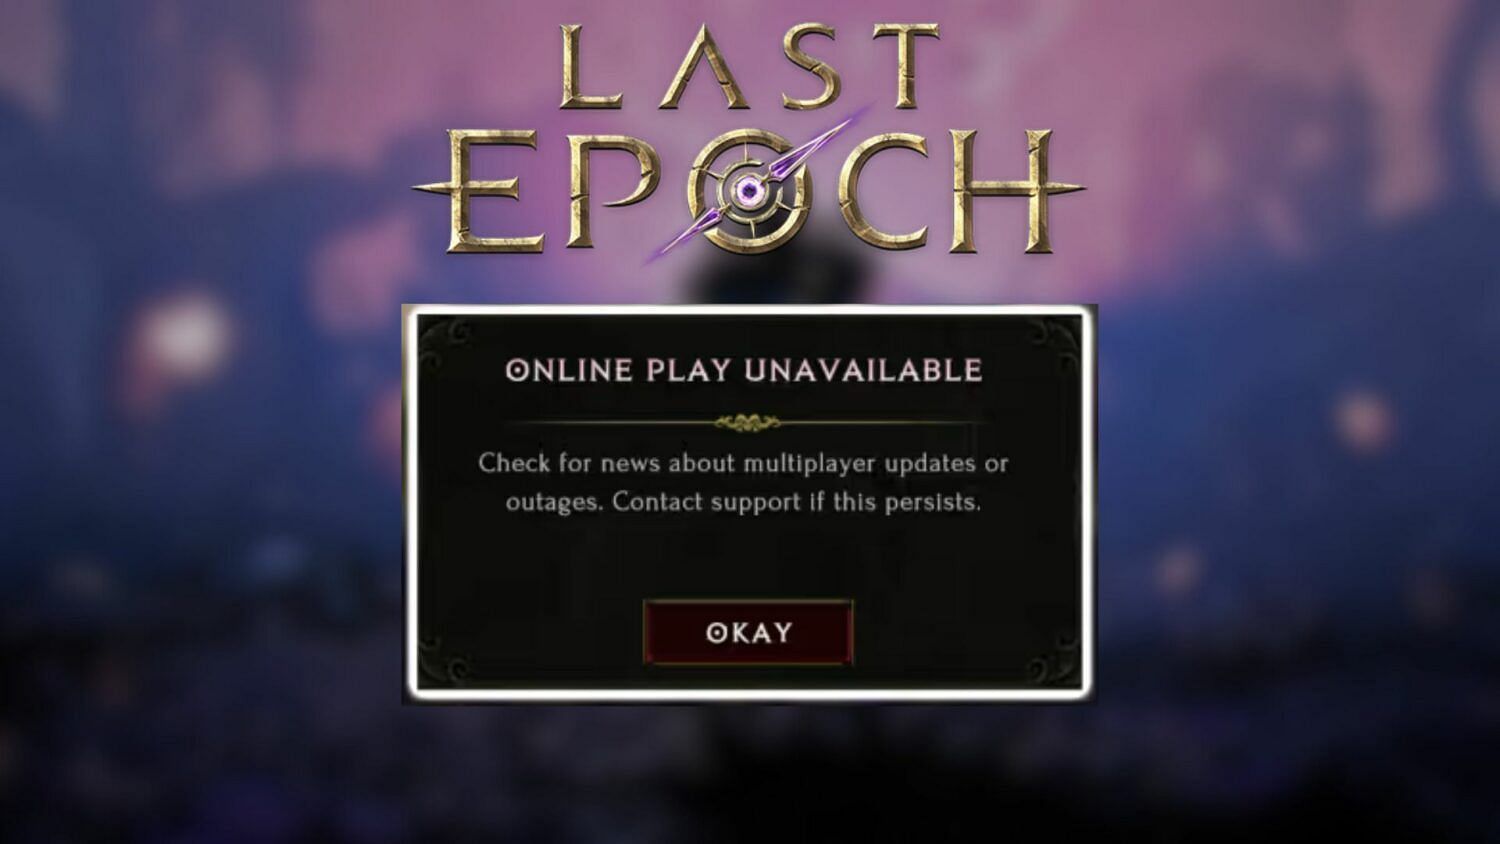 Even when services are unavailable, you can play Last Epoch offline (Image via Eleventh Hour games)